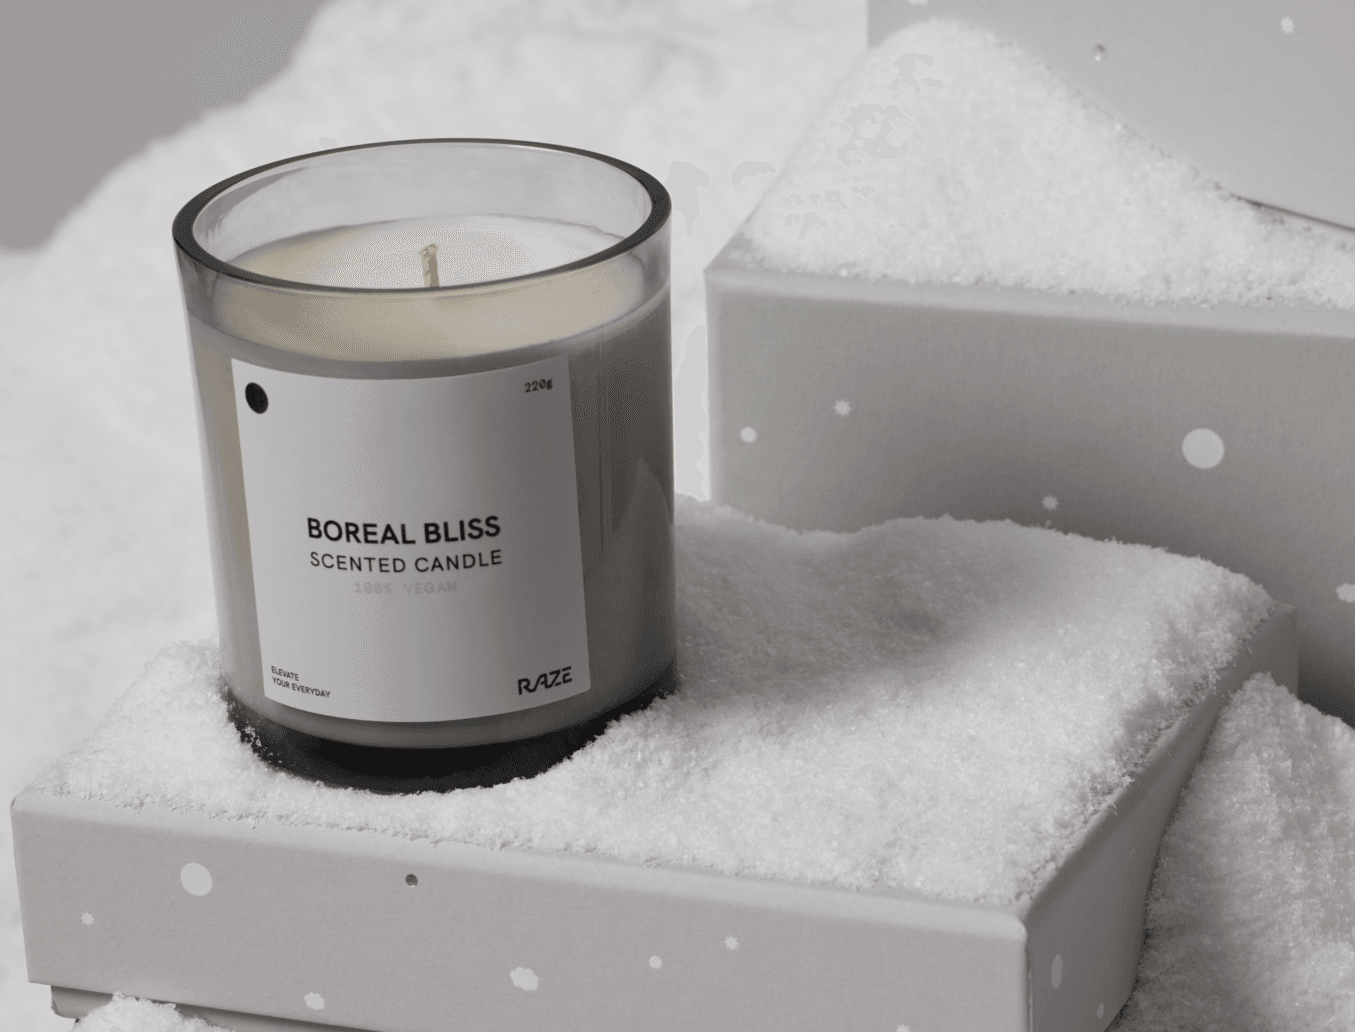 Boreal Bliss Scented Candle